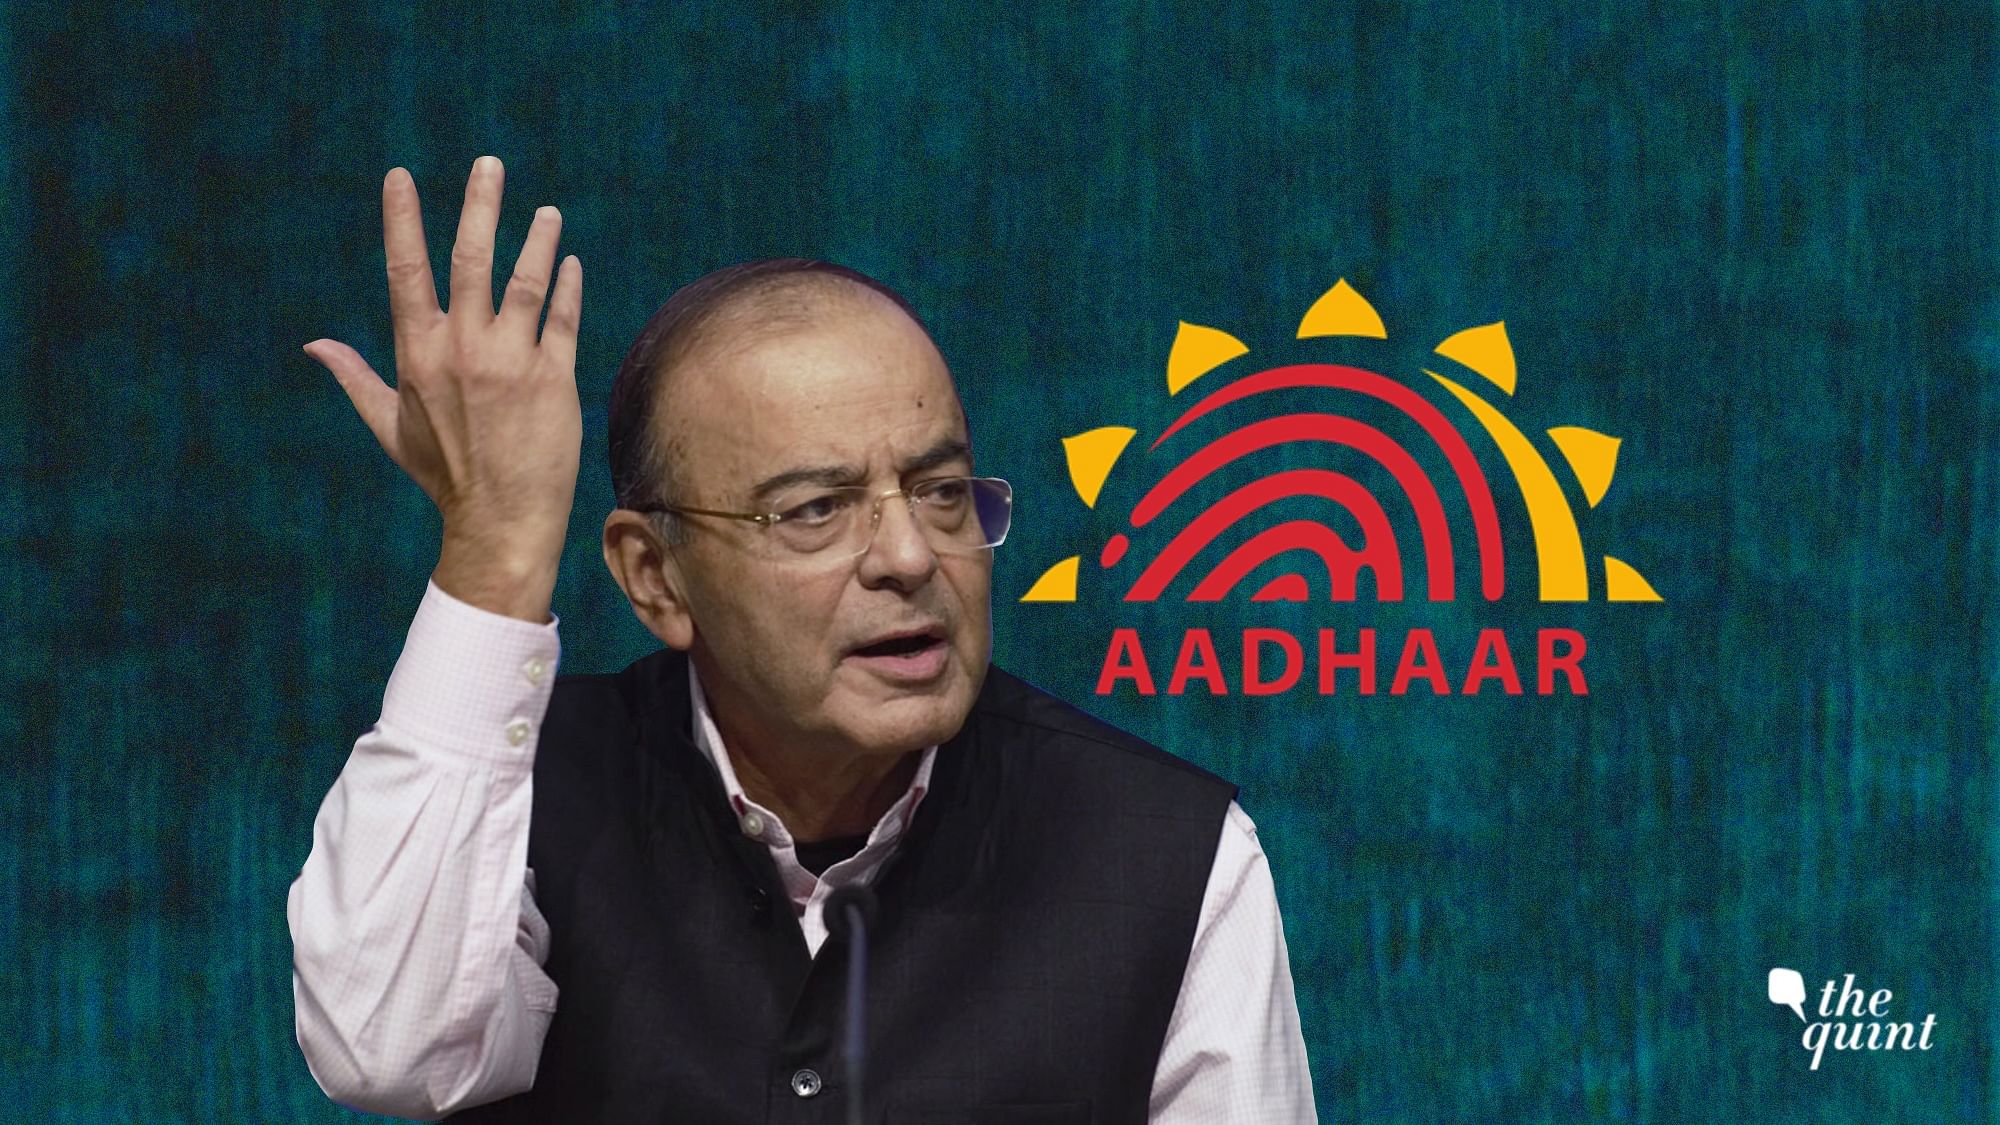 Finance Minister Arun Jaitley writes about Aadhaar, its inception, the NDA’s role and its benefits.